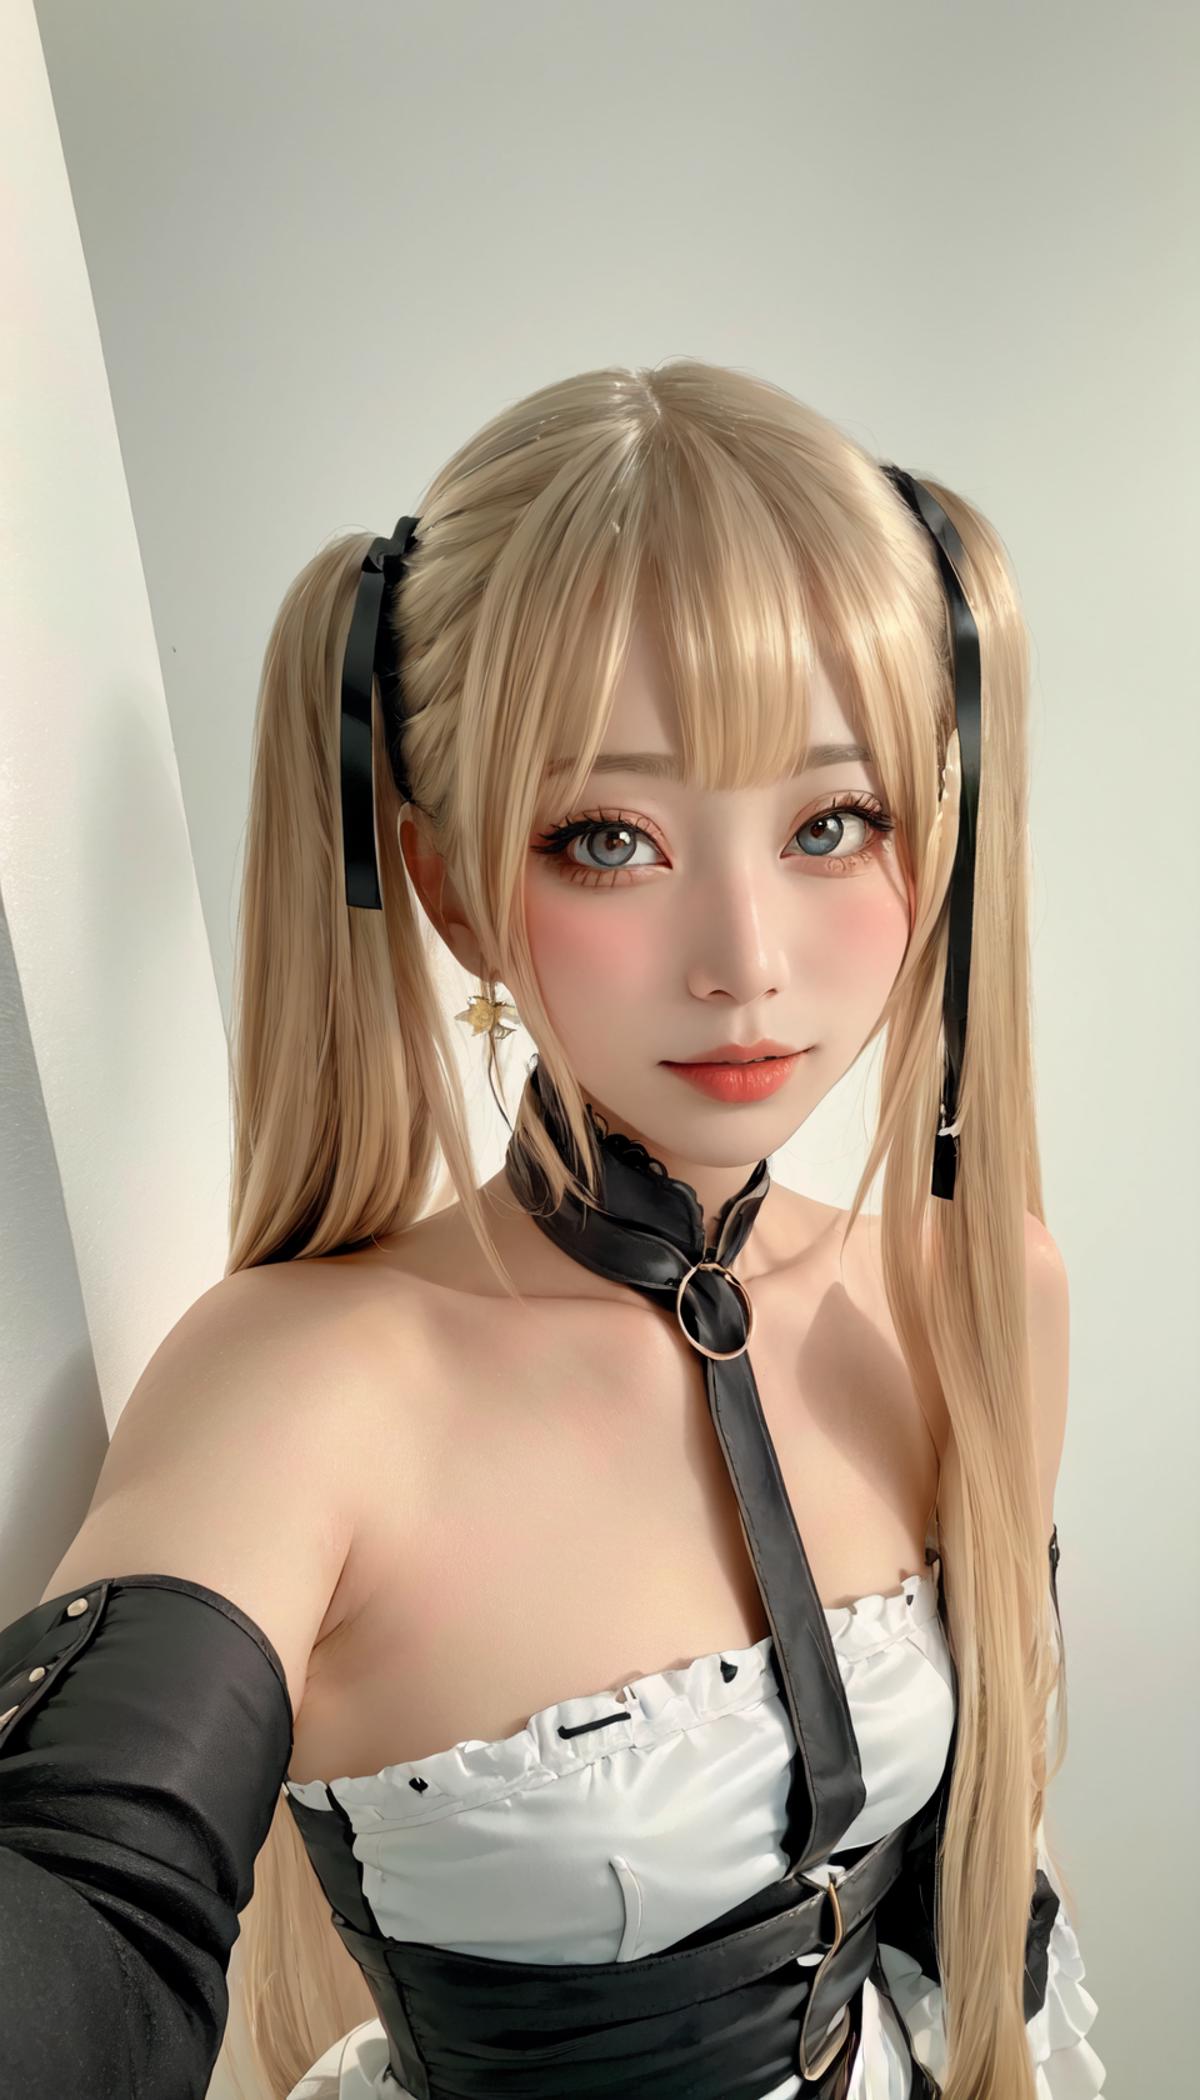 AI model image by Gwess